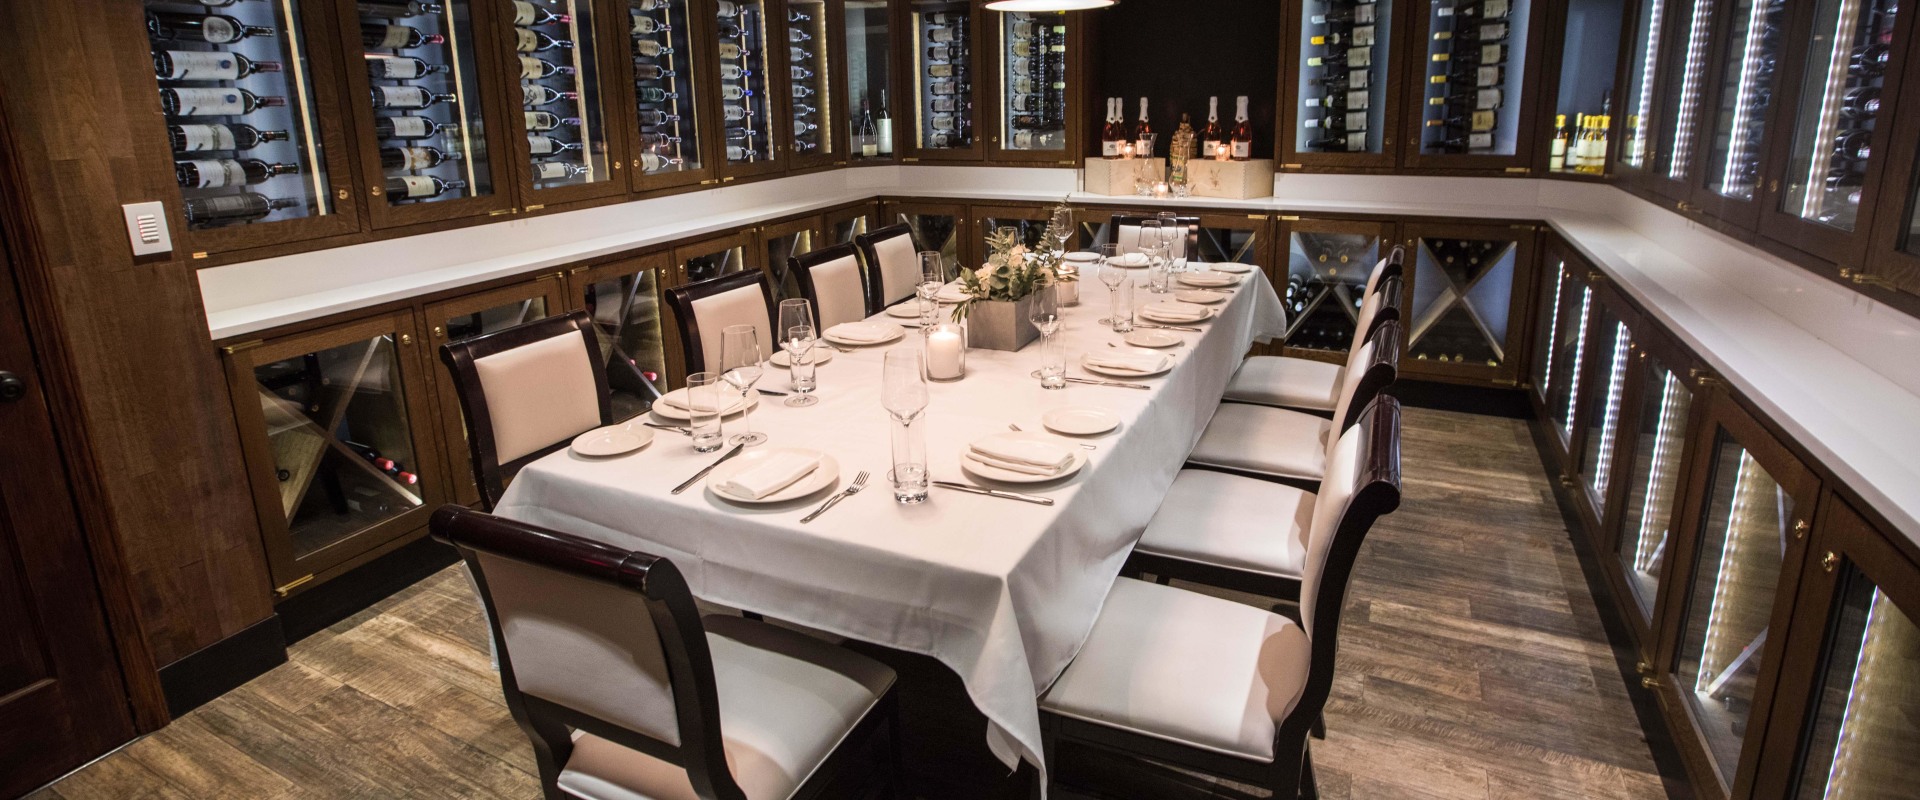 What is a Private Dining Room For? - An Expert's Guide